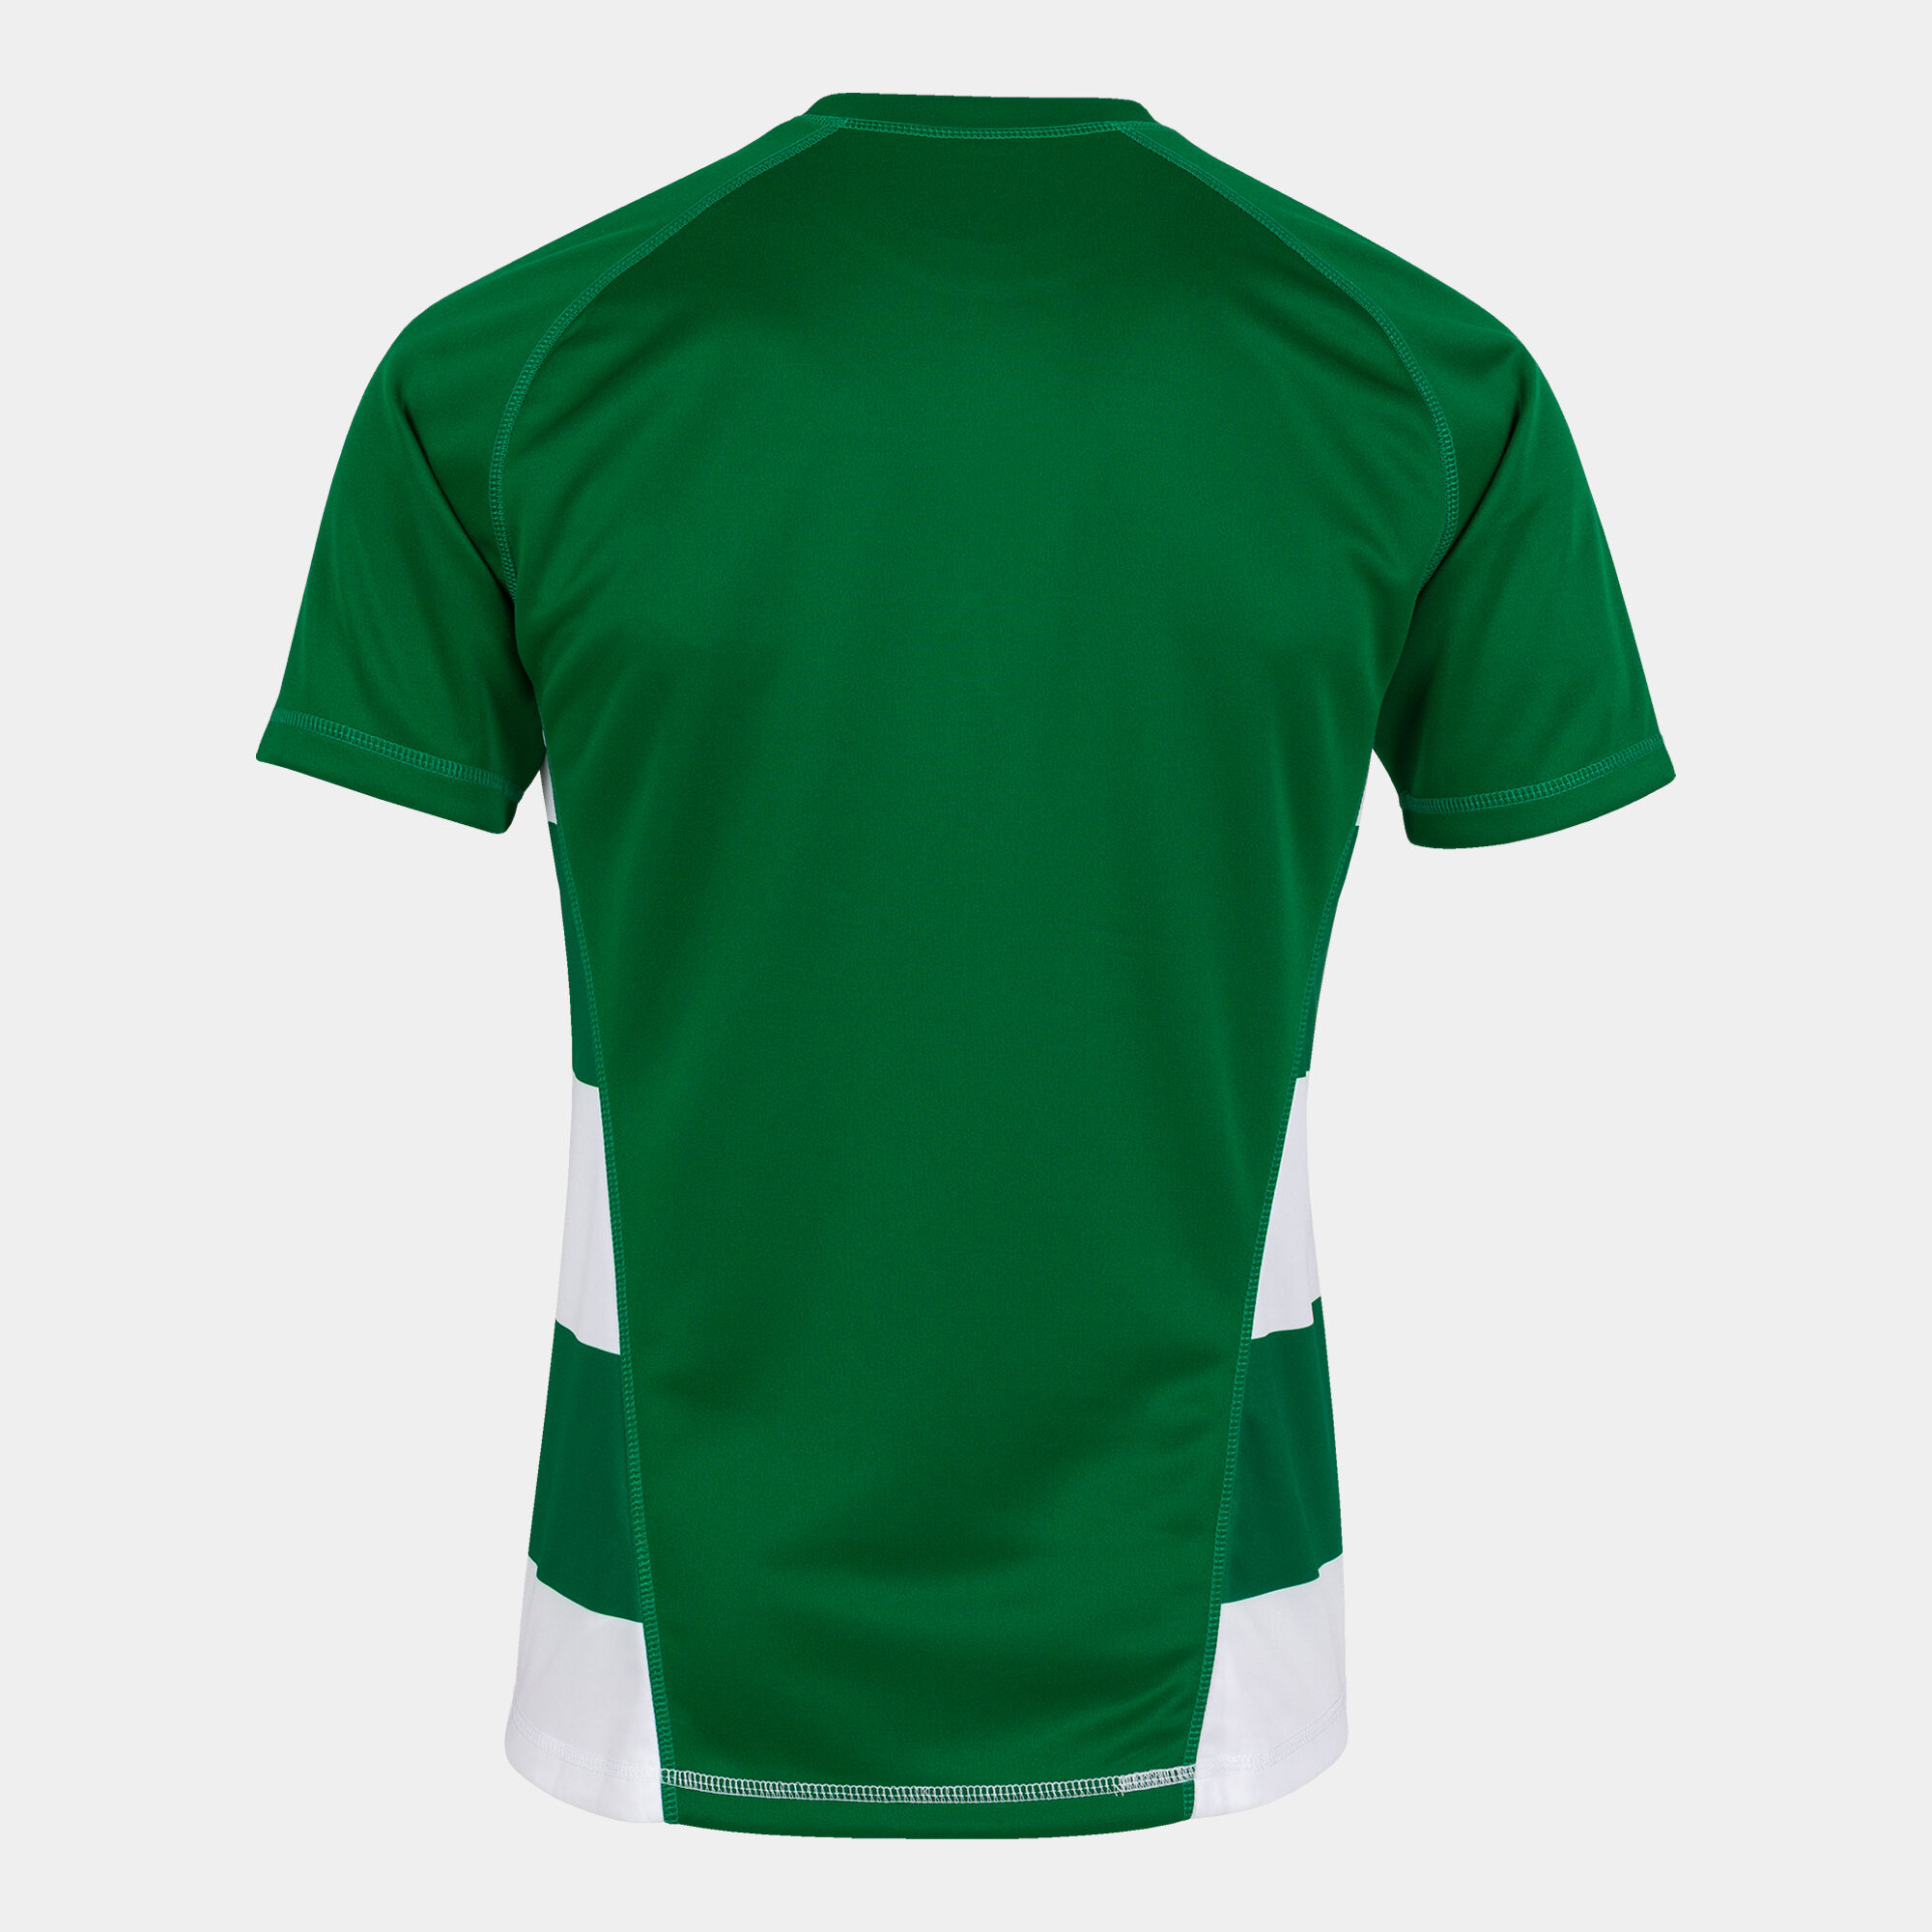 Maillot manches courtes homme Prorugby II vert blanc